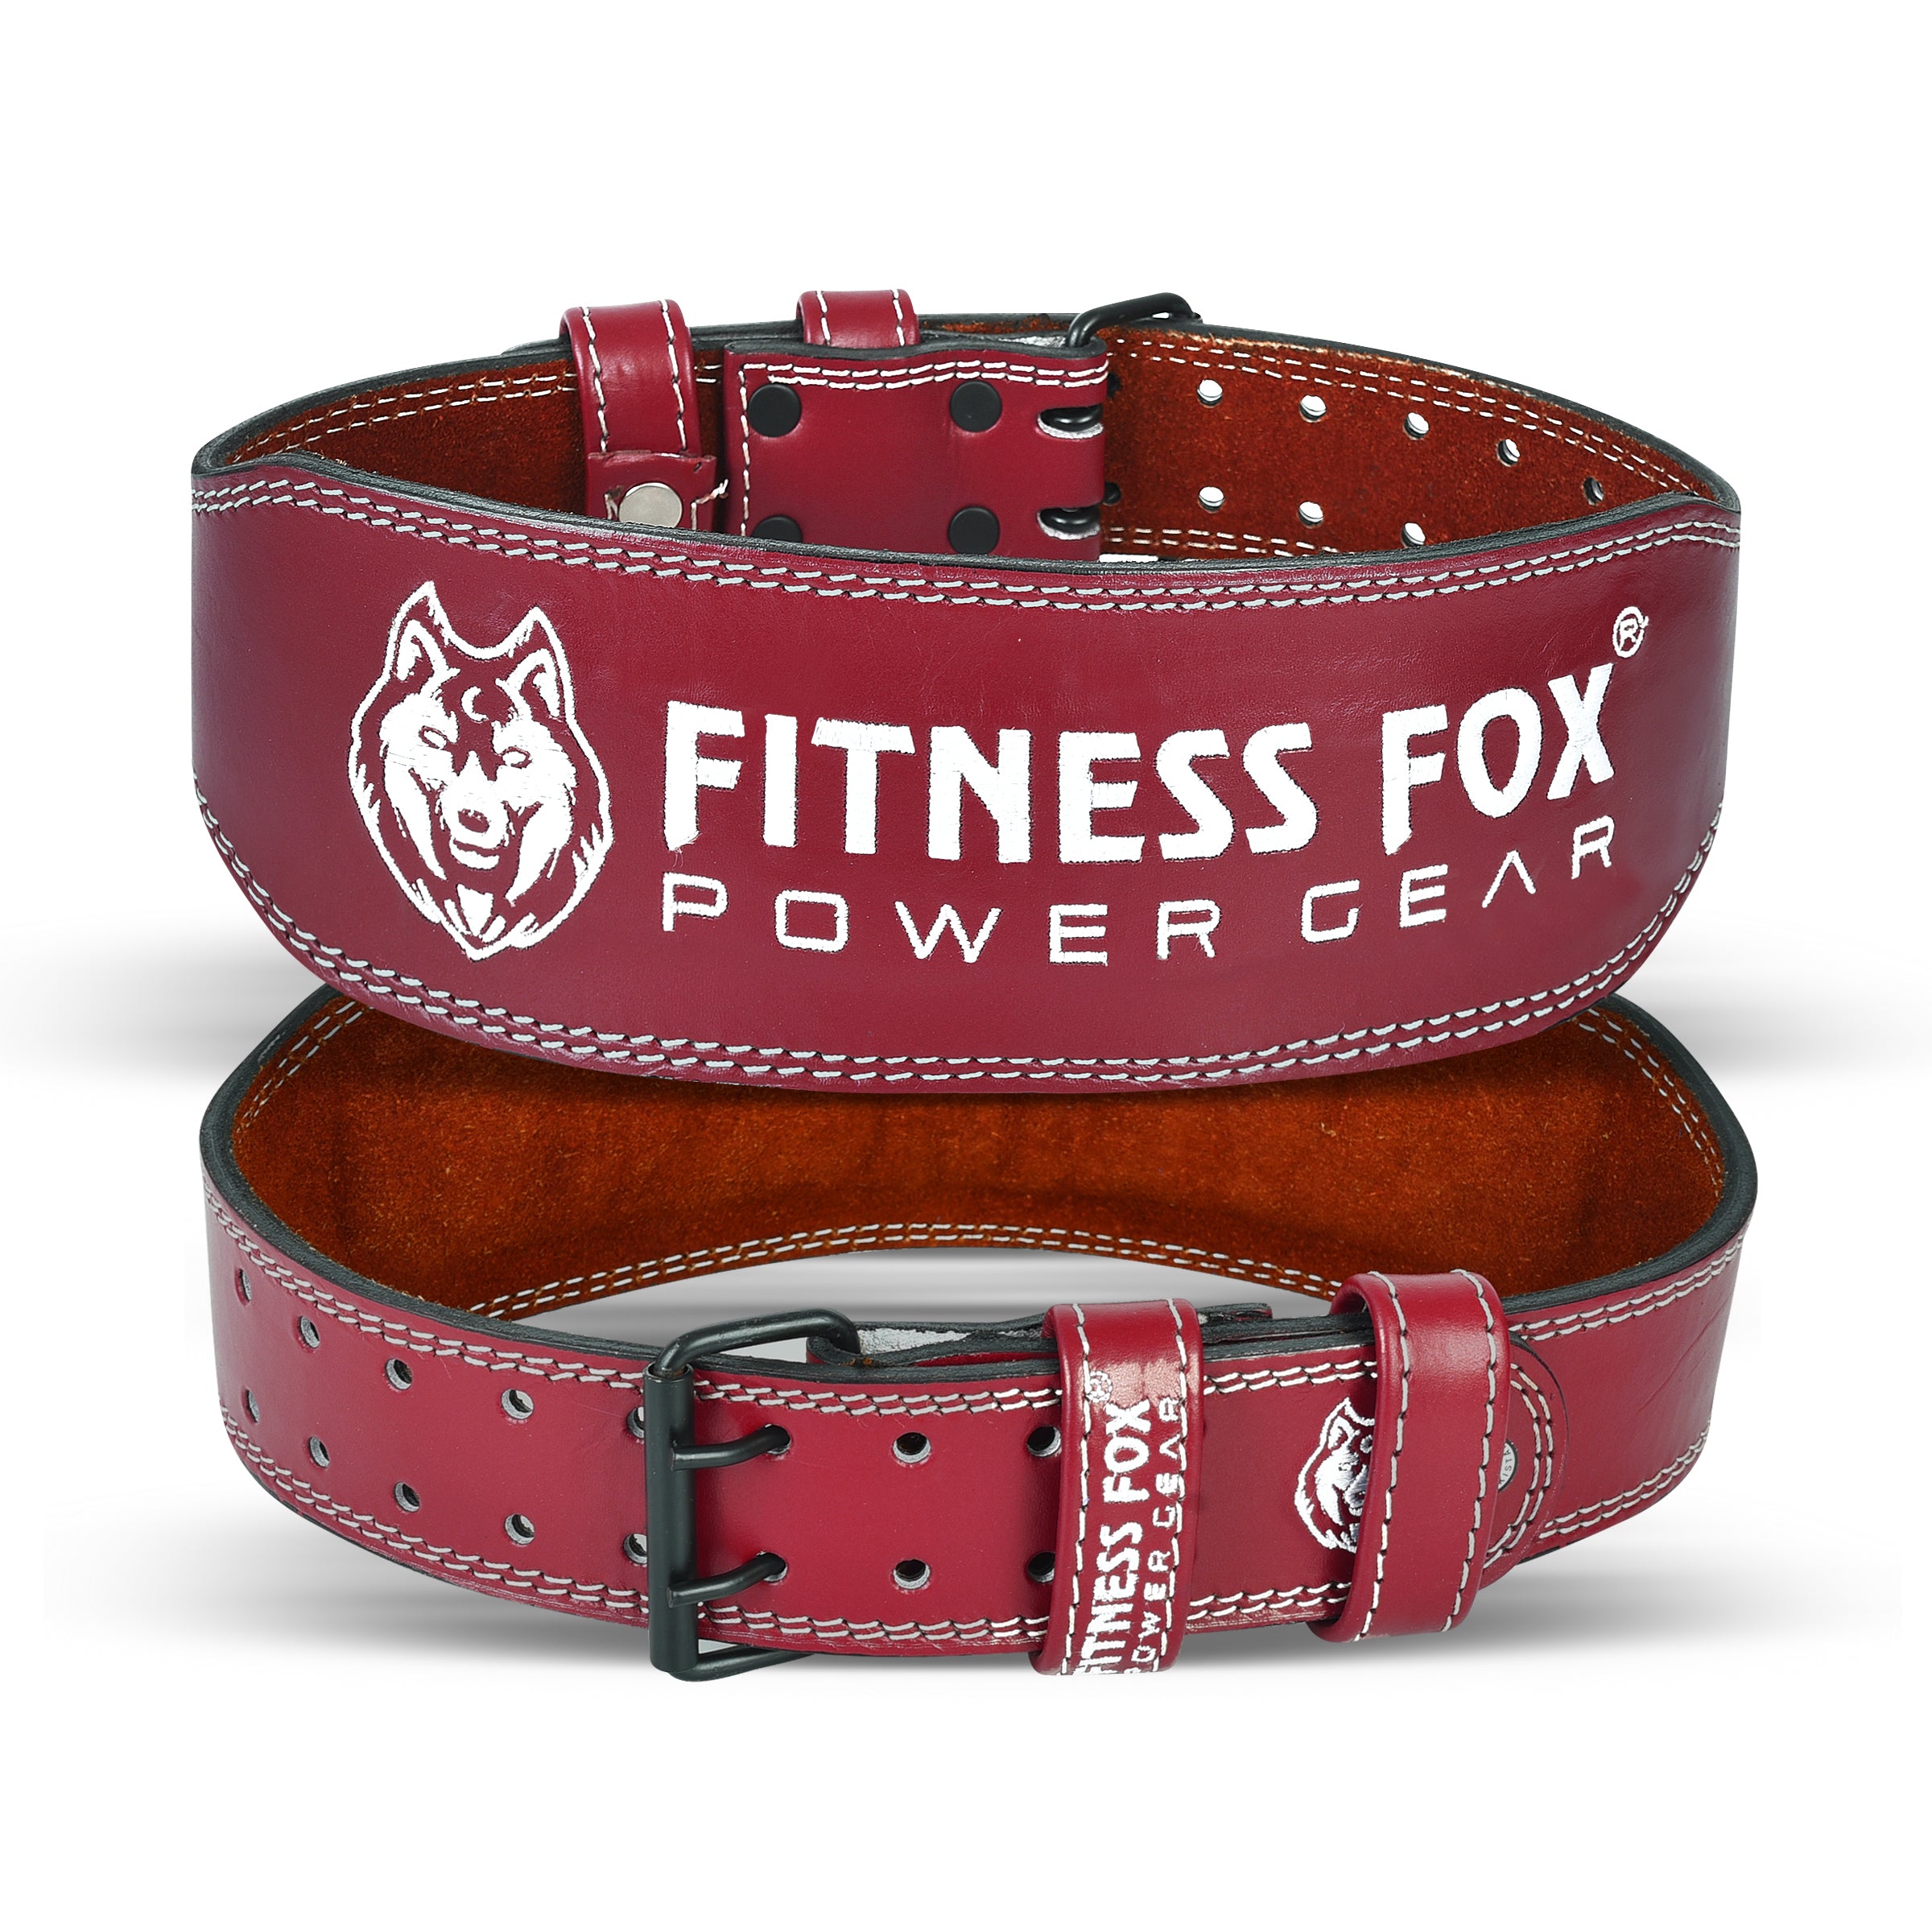 FitnessFox 4" Wine Weightlifting Leather Belt